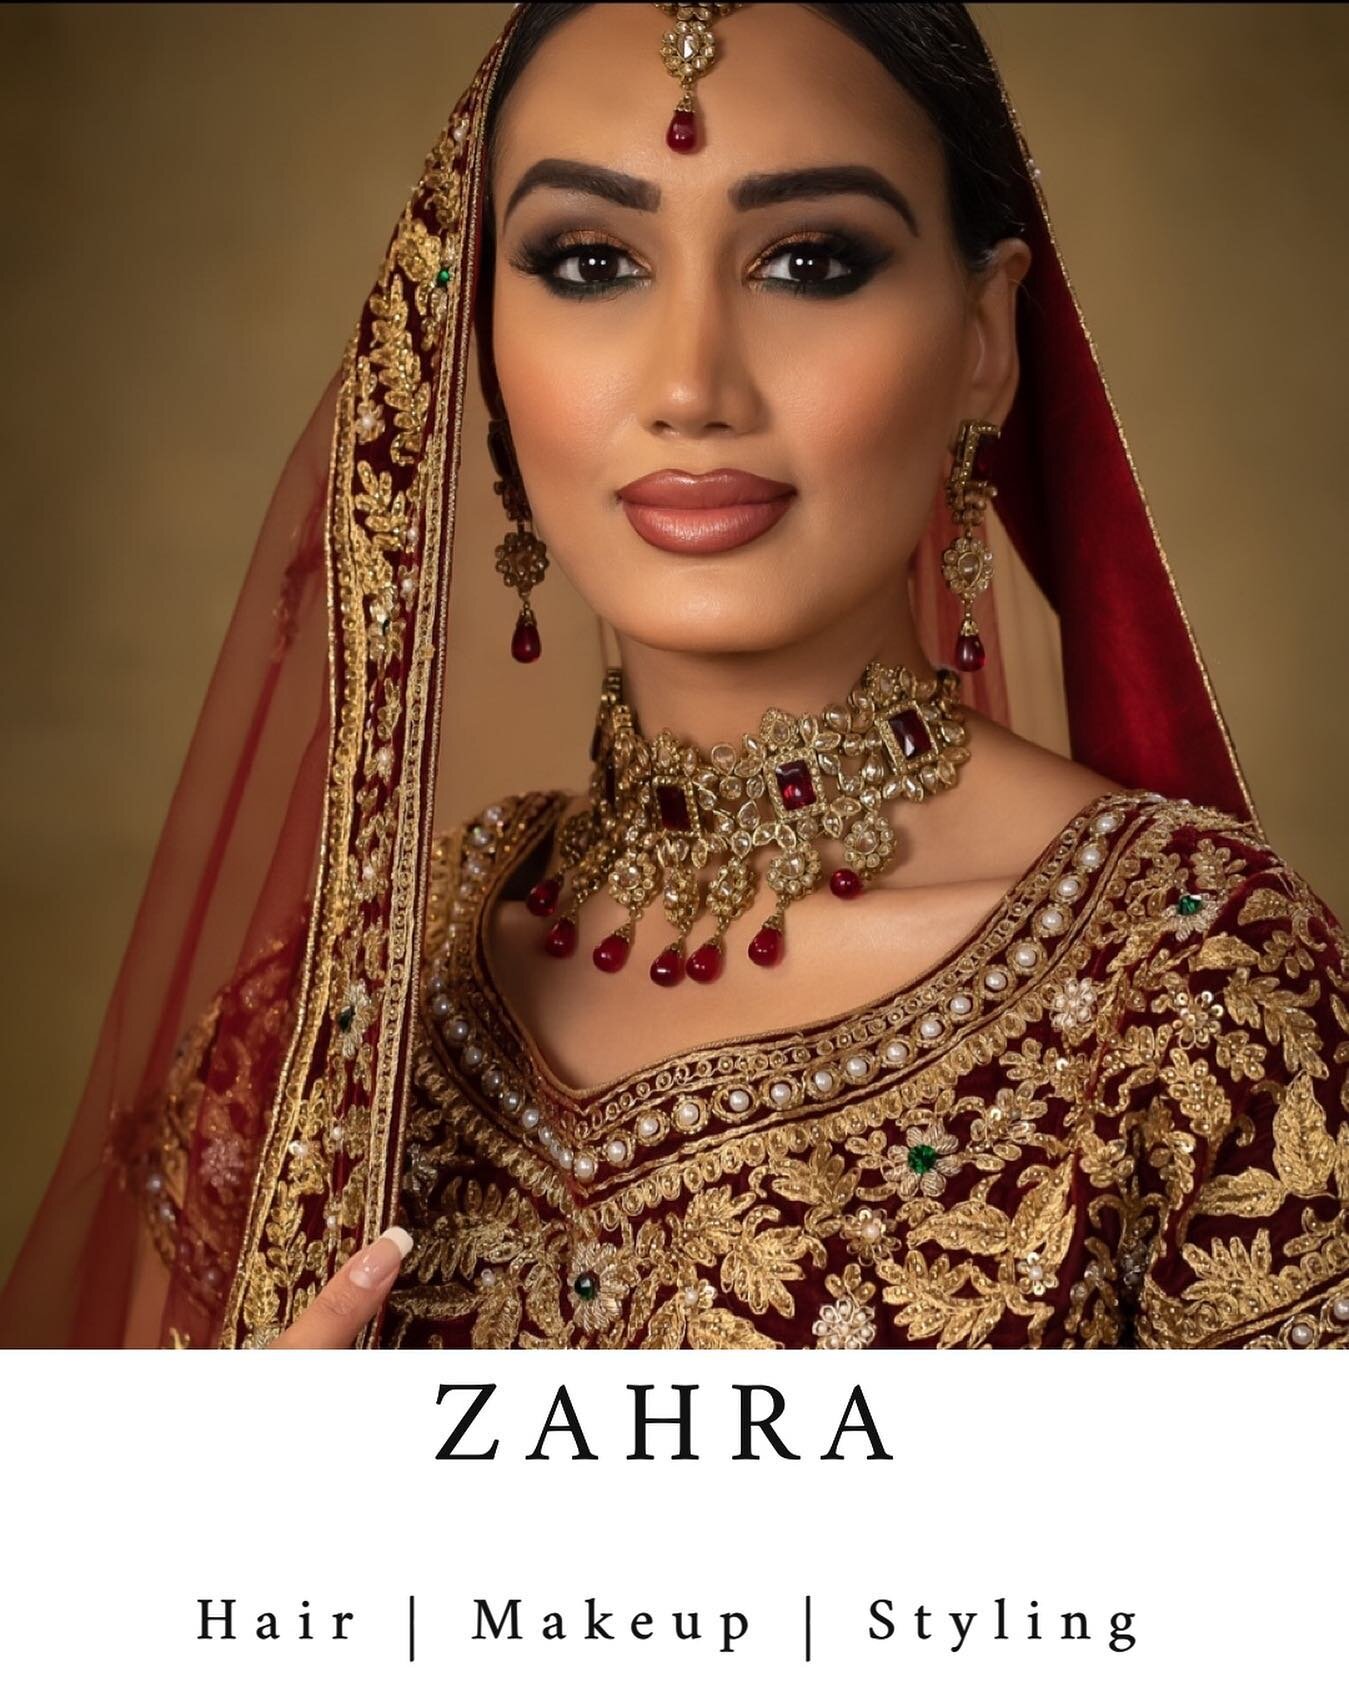 💄Senior Stylist: ZAHRA
📍Location: W. LONDON - available to travel ----------------------------------------------------------------------------------
To BOOK 👉🏽 Email us at promakeuplondonstylists@gmail.com ----------------------------------------